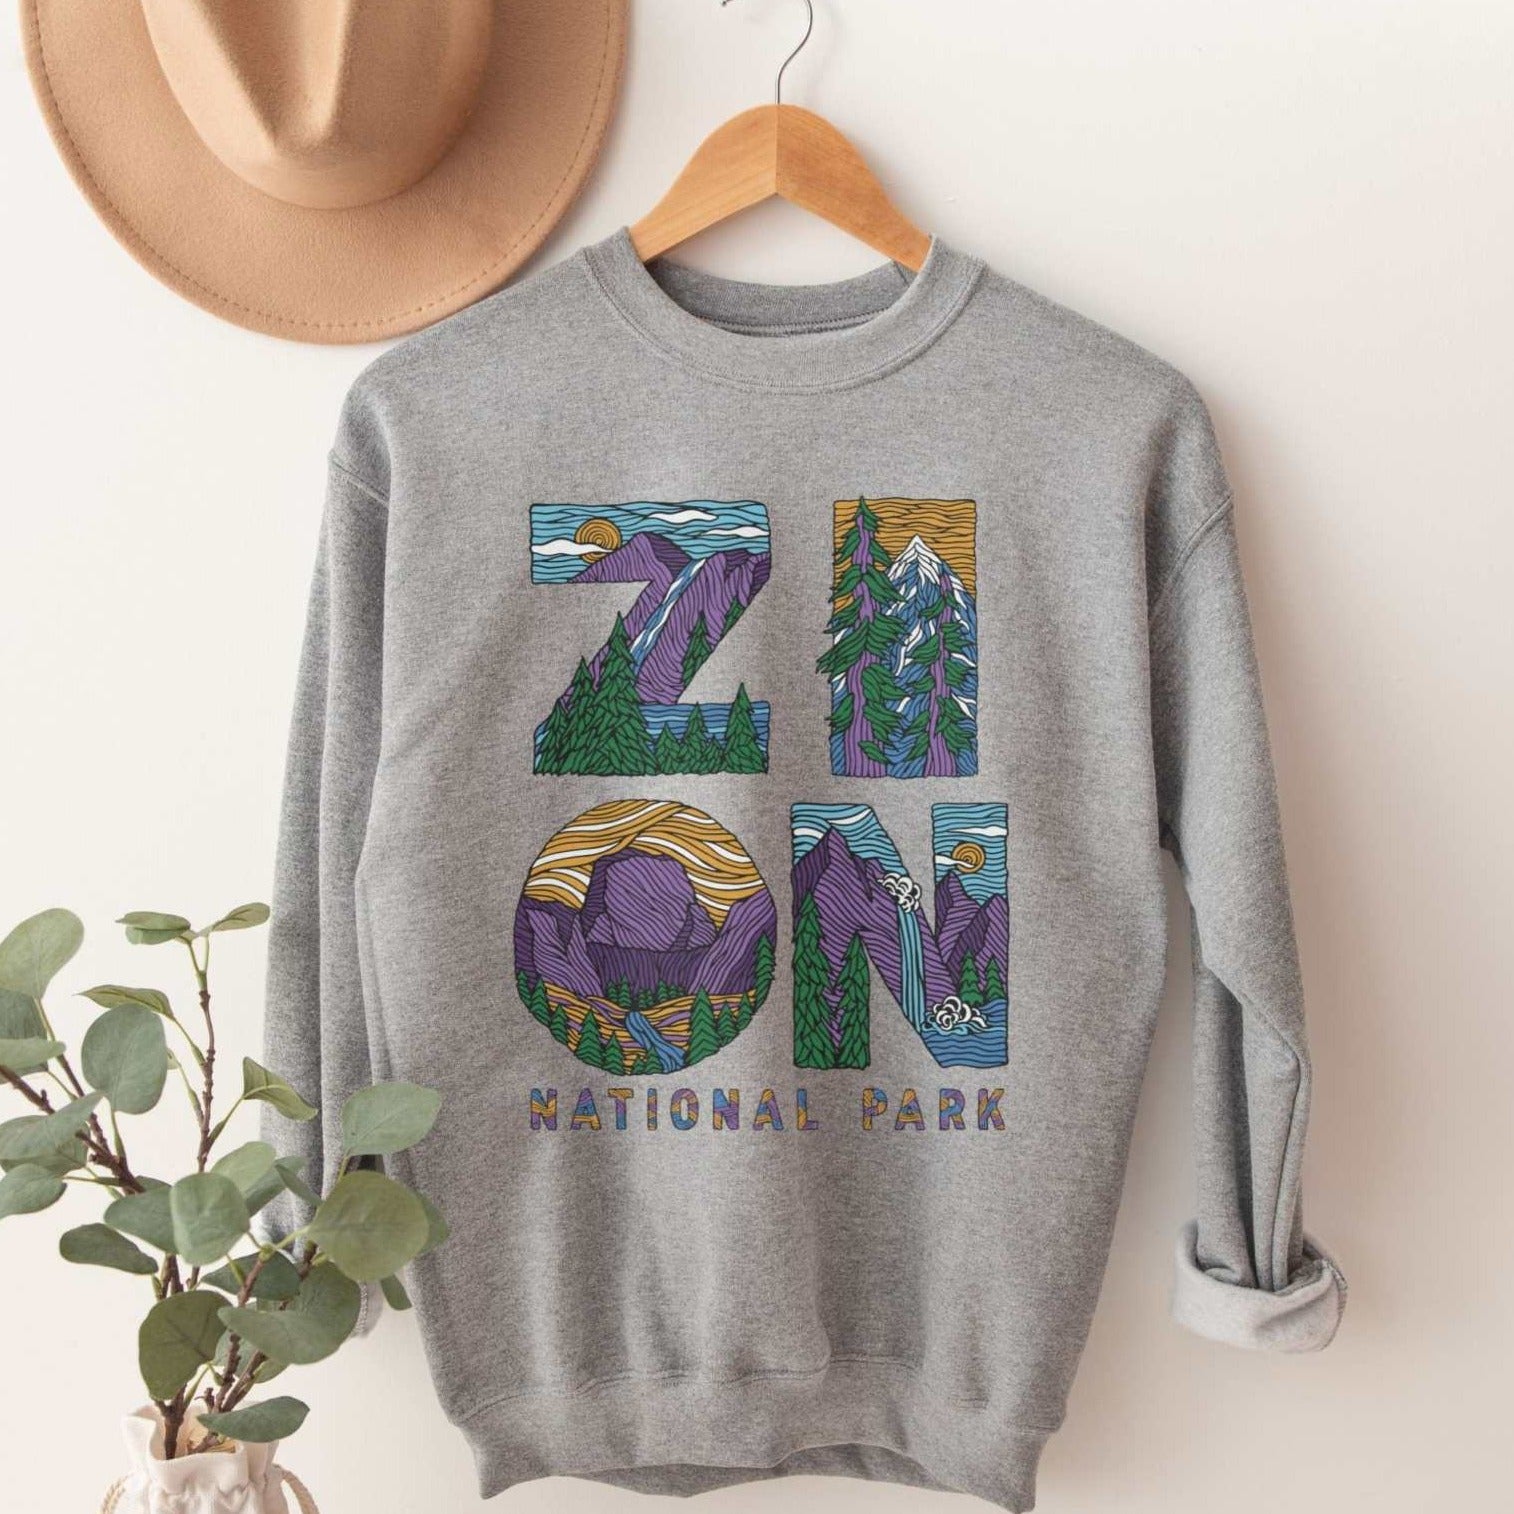 Zion Letters National Park SweatshirtBring back the vibe on your next outdoor outing with this adventure filled Zion National Park Sweatshirt.
- cotton blend - medium weight - unisex sizing
 
The Lincol